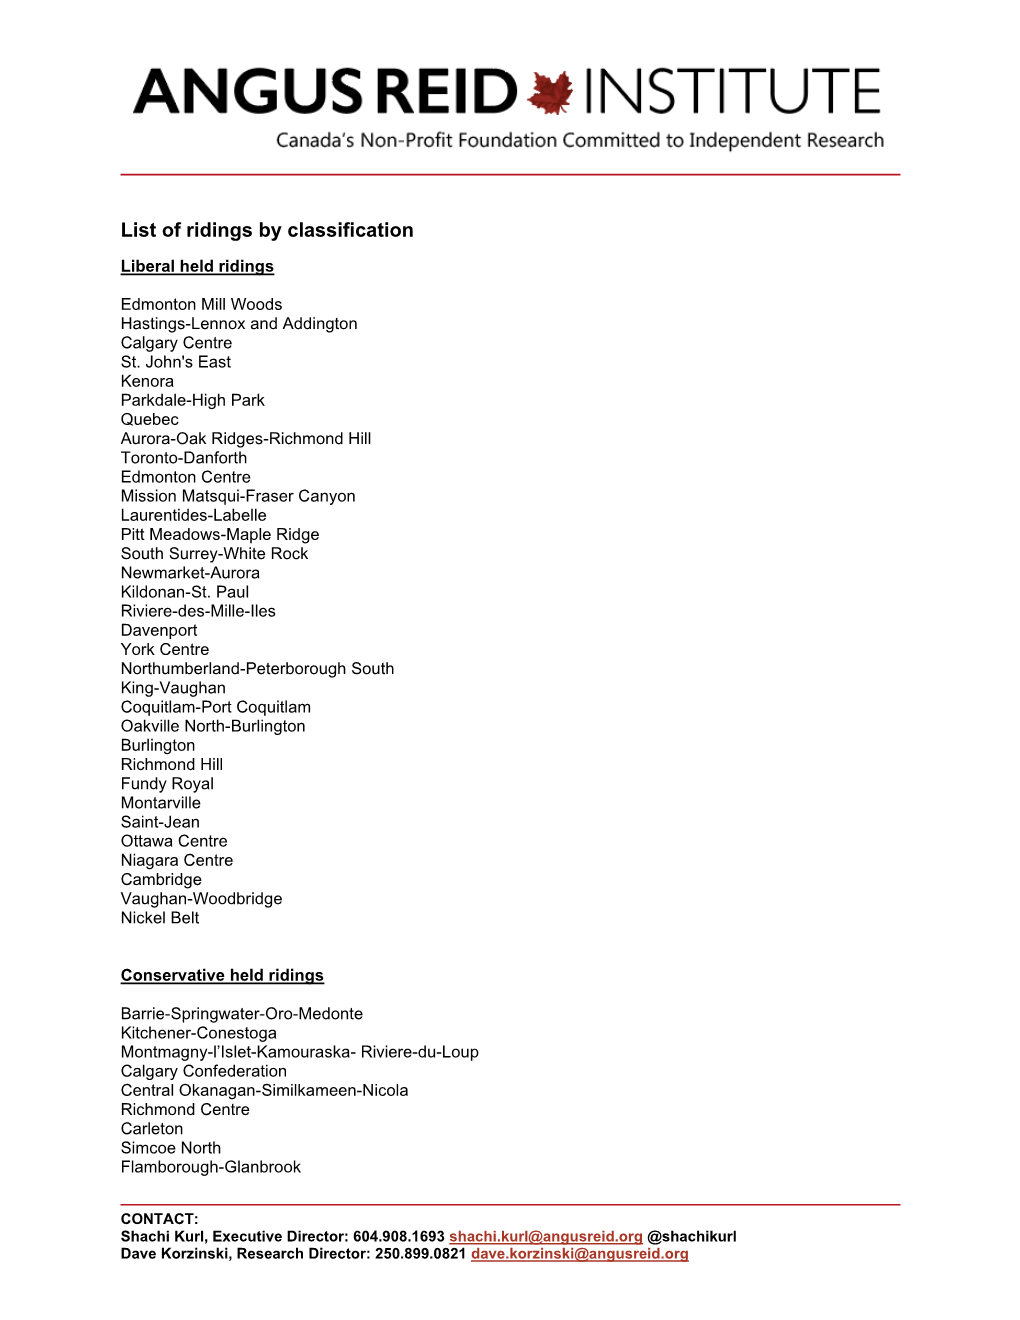 List of Ridings by Classification